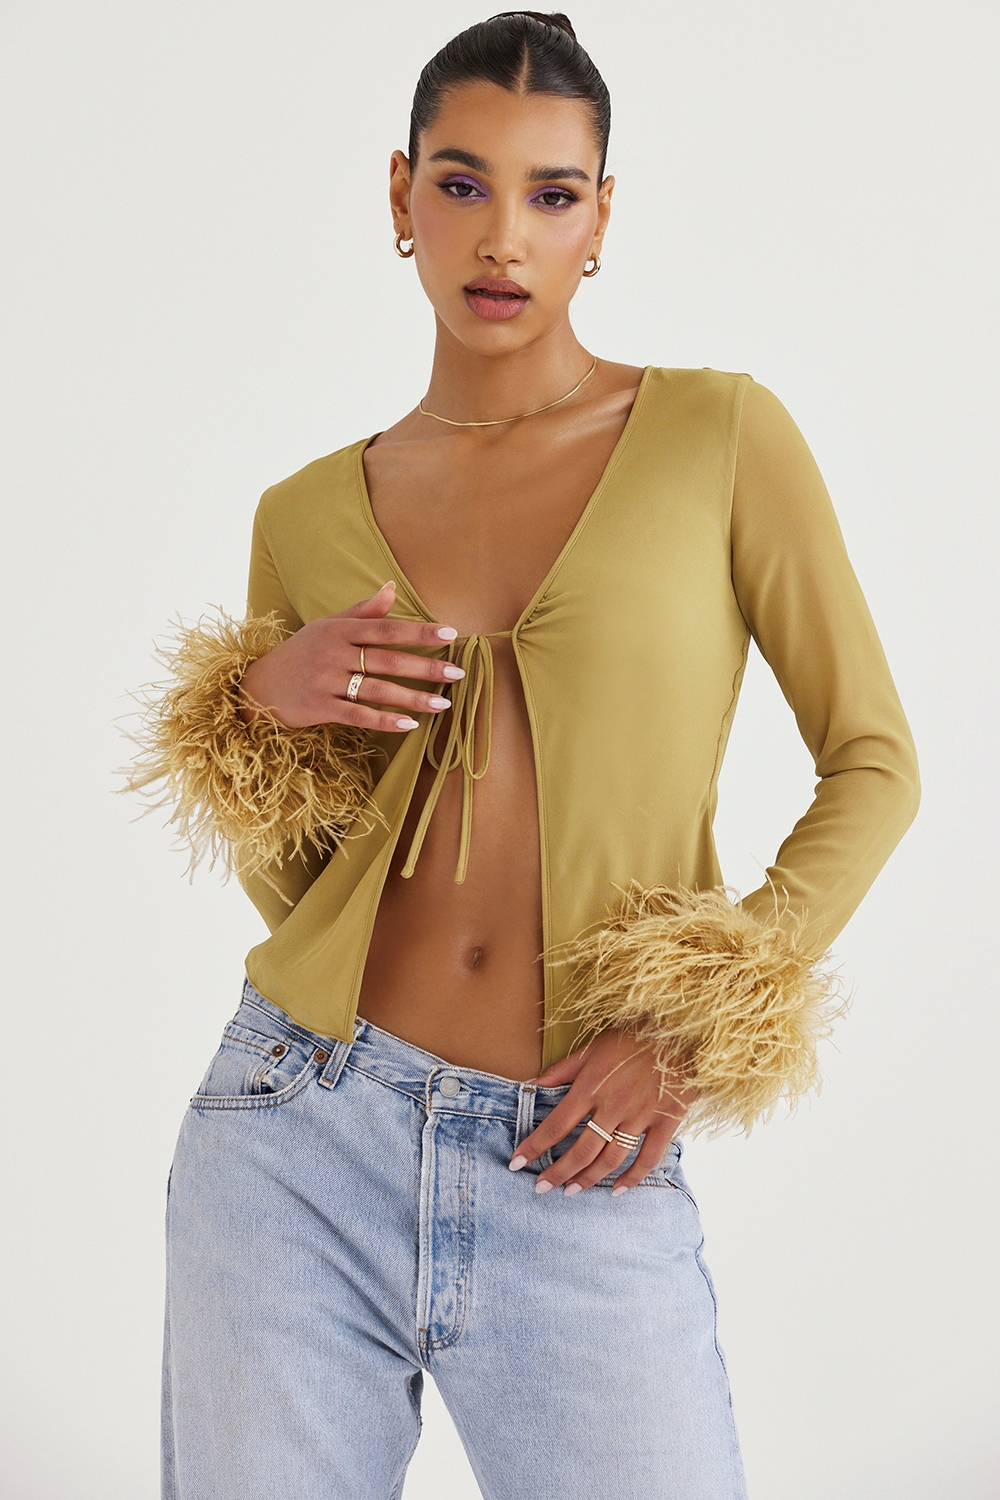 Claudia, Olive Trimmed Top - SALE